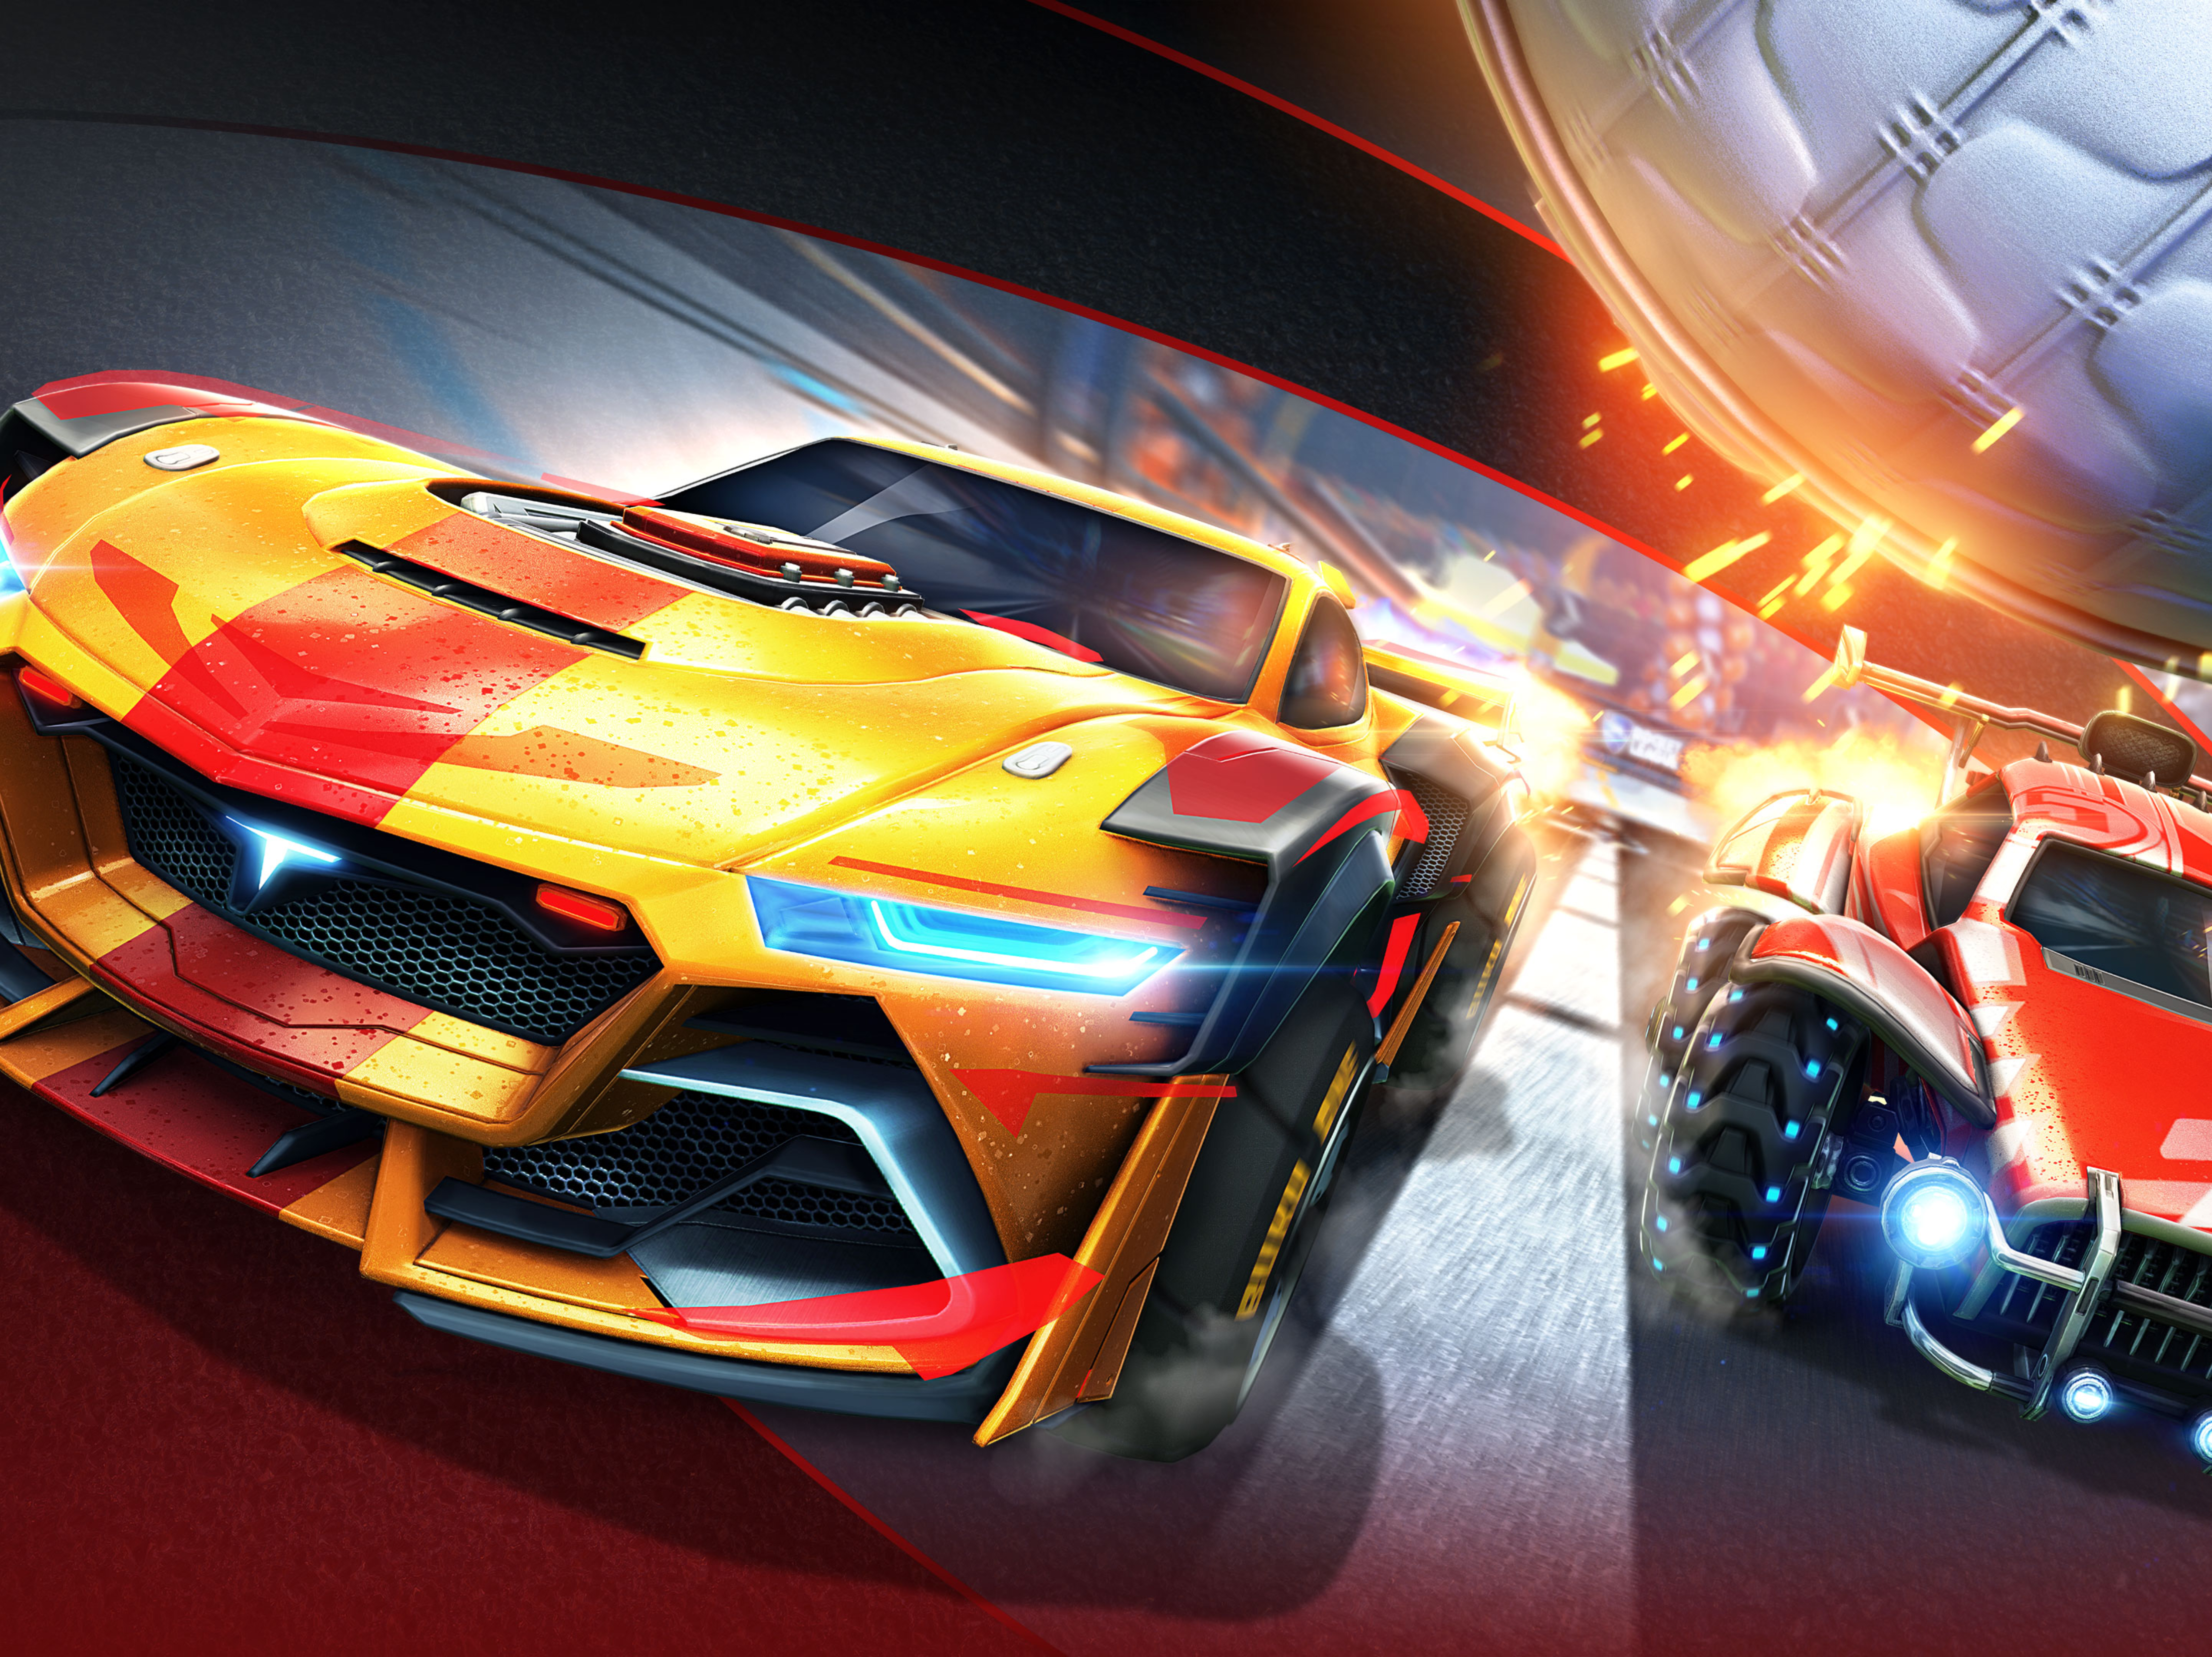 Epic Games plans to bring the full Rocket League experience to mobile